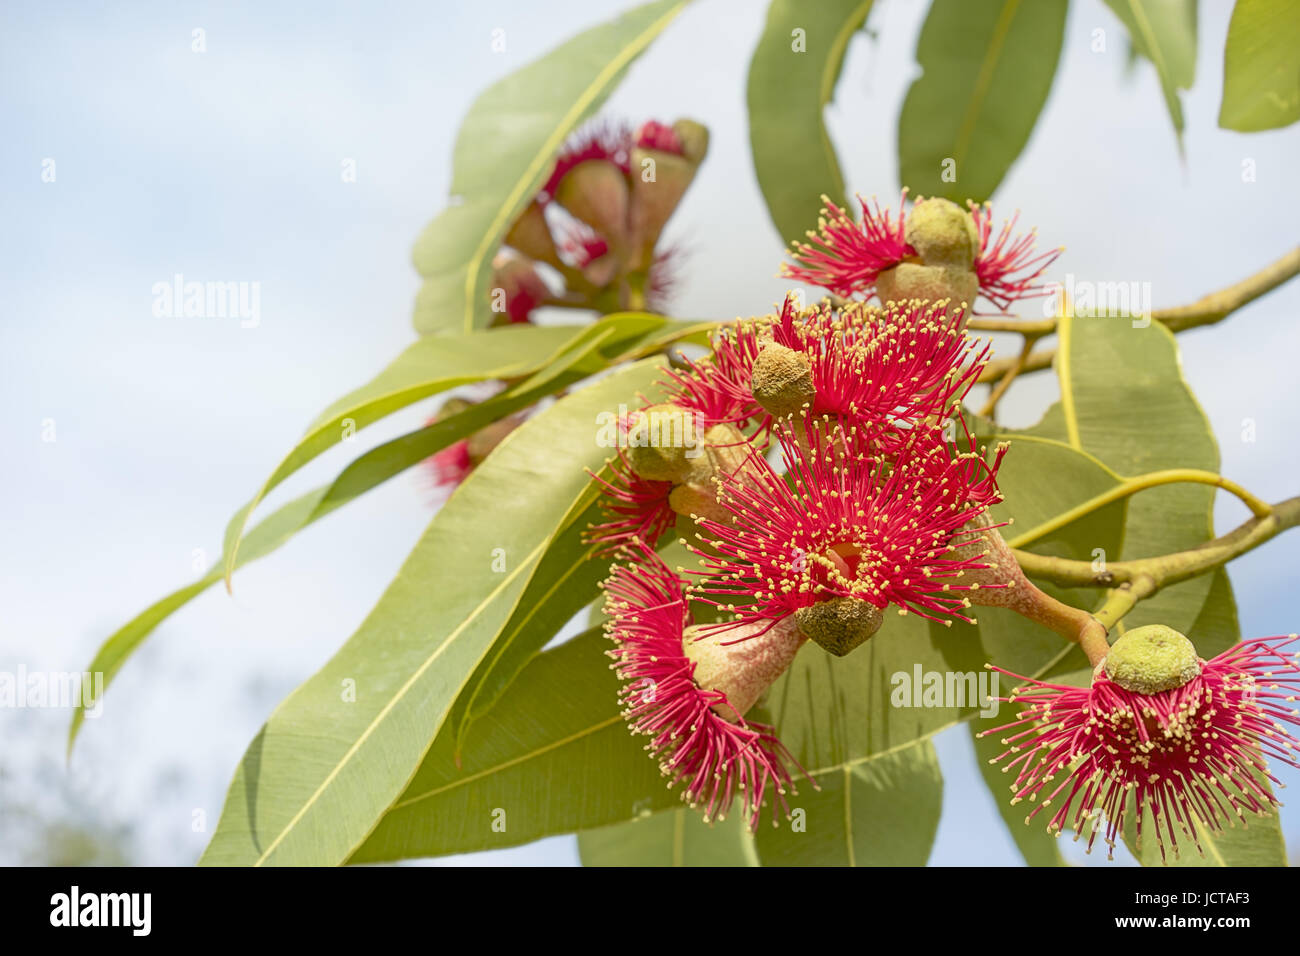 Red gum flowers with green leaves of Australian native eucalyptus tree called Summer Red flowering in winter in Australia Stock Photo